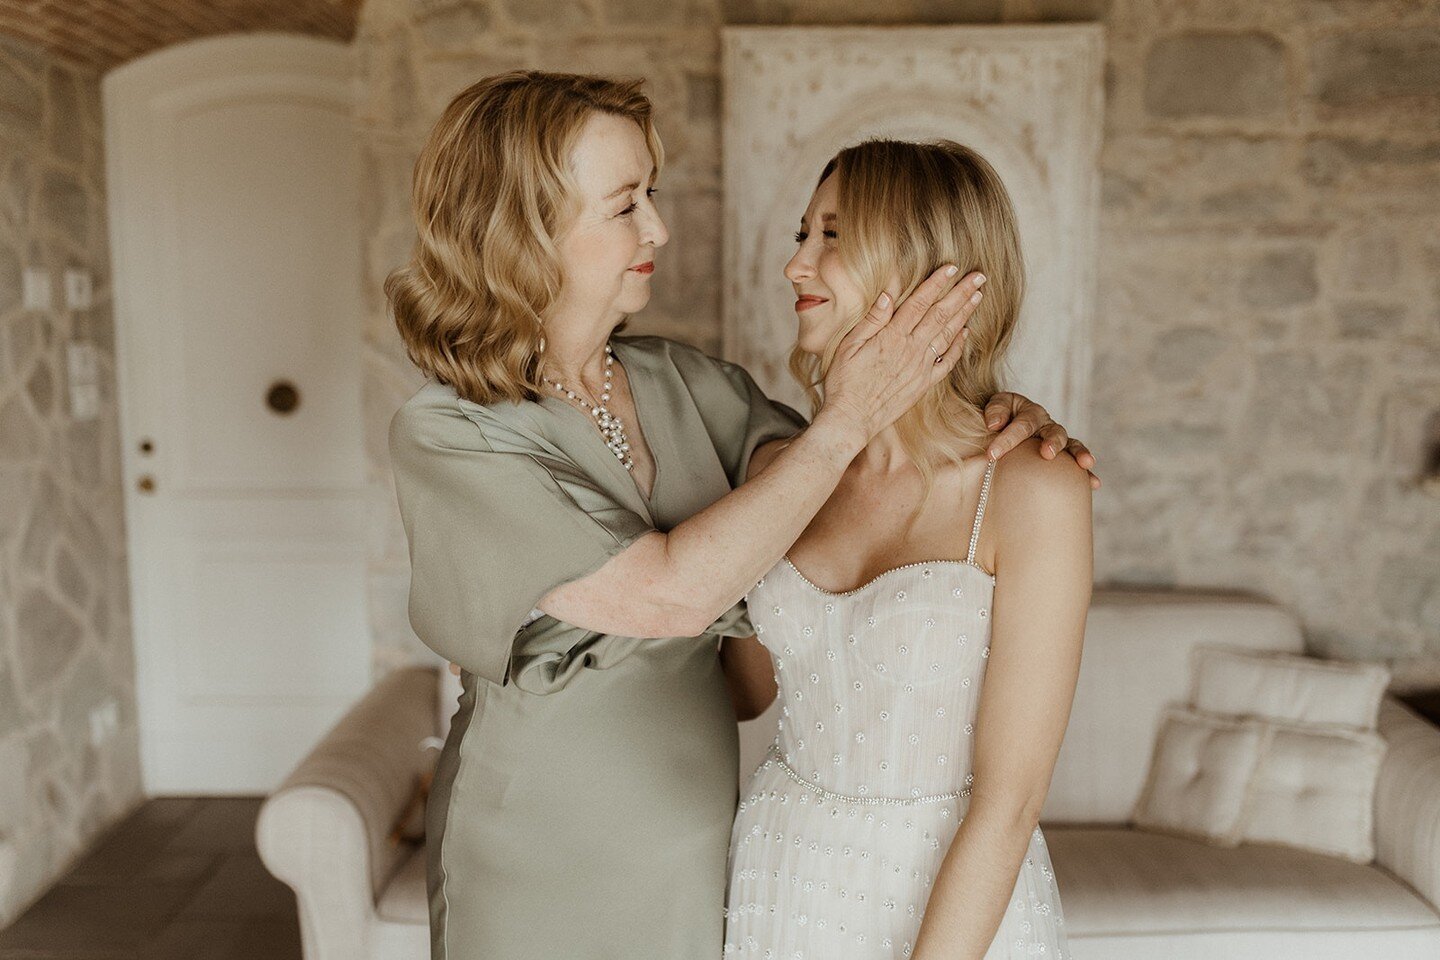 Happy Mother's Day to your day of dress stylist 😉 Sending extra love to those that need it today ❤️⁠
⁠
Our #realdresstheorybride Rhylae @smileyrhylae in @danaharel photographed by @samantha.ruscher.photo 💫